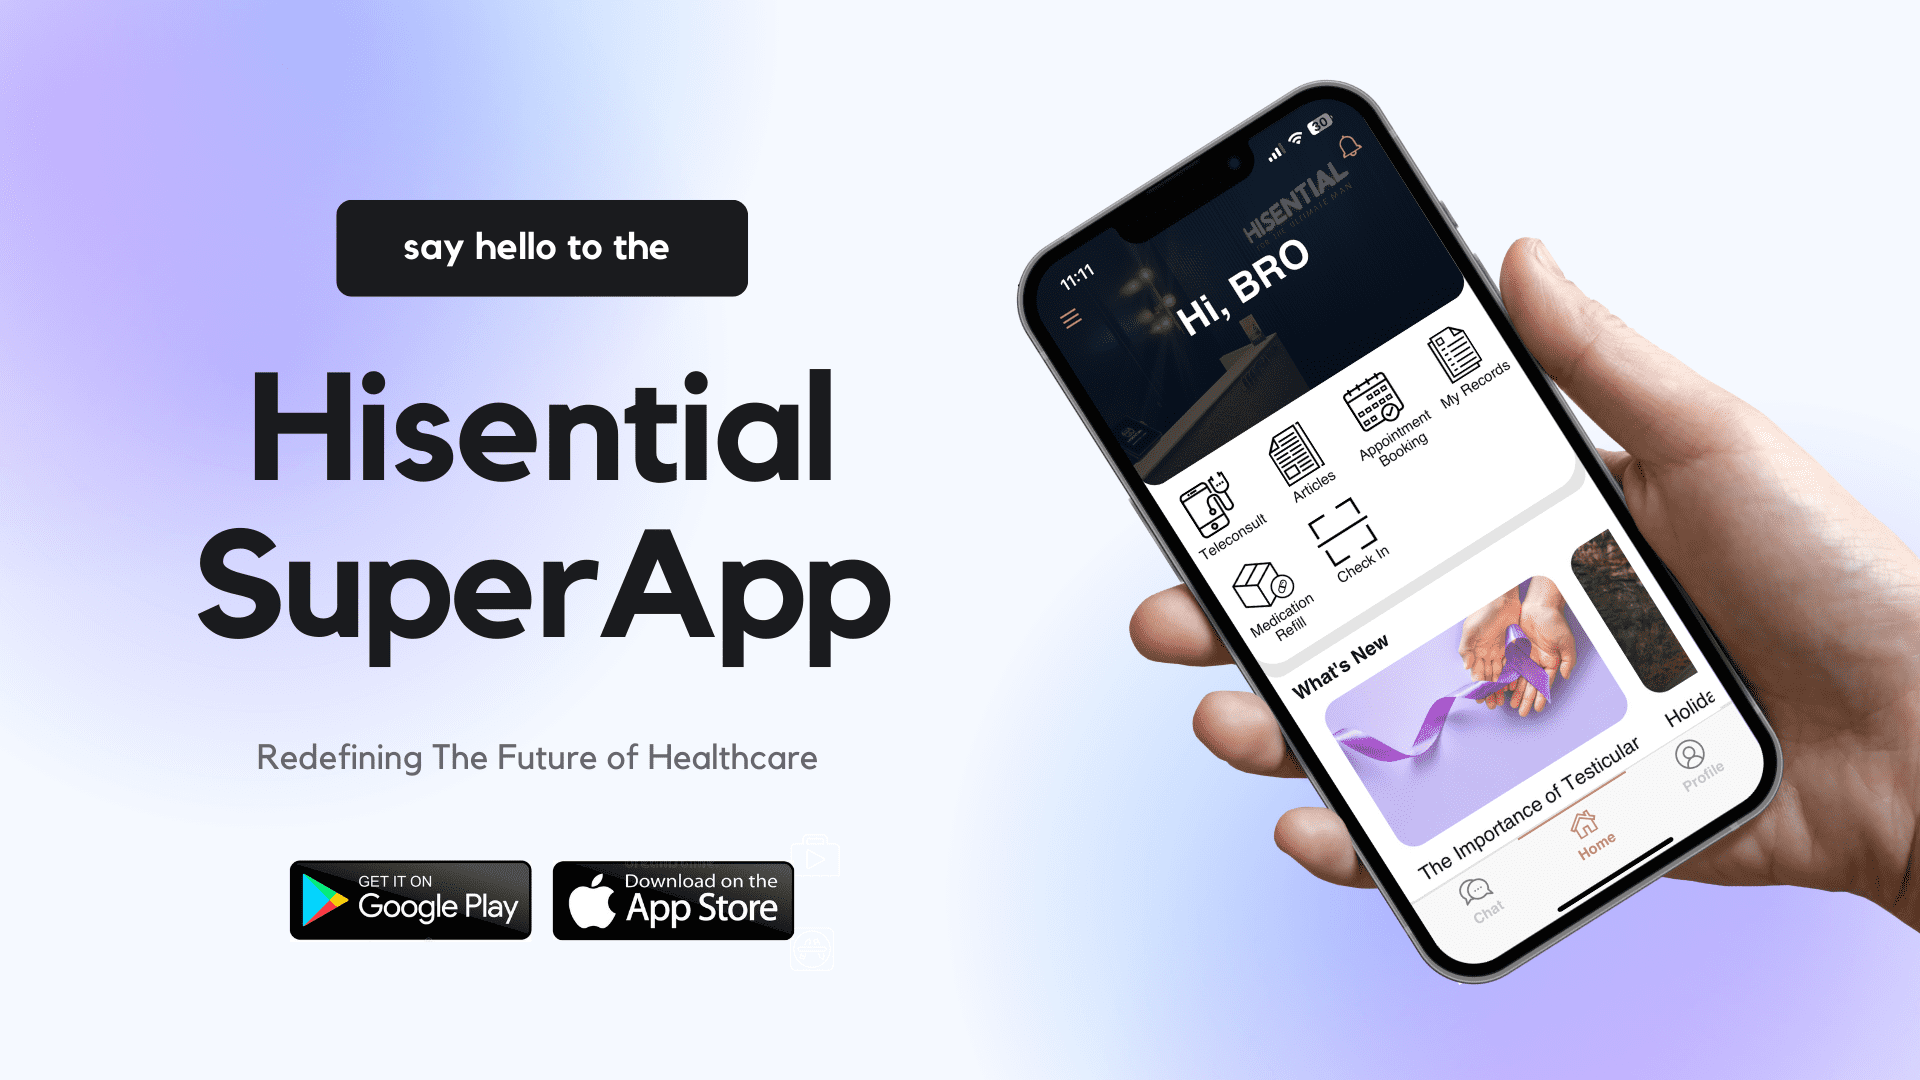 Mobile App – Hisential SuperApp: The Future of Personalized Healthcare at Your Fingertips